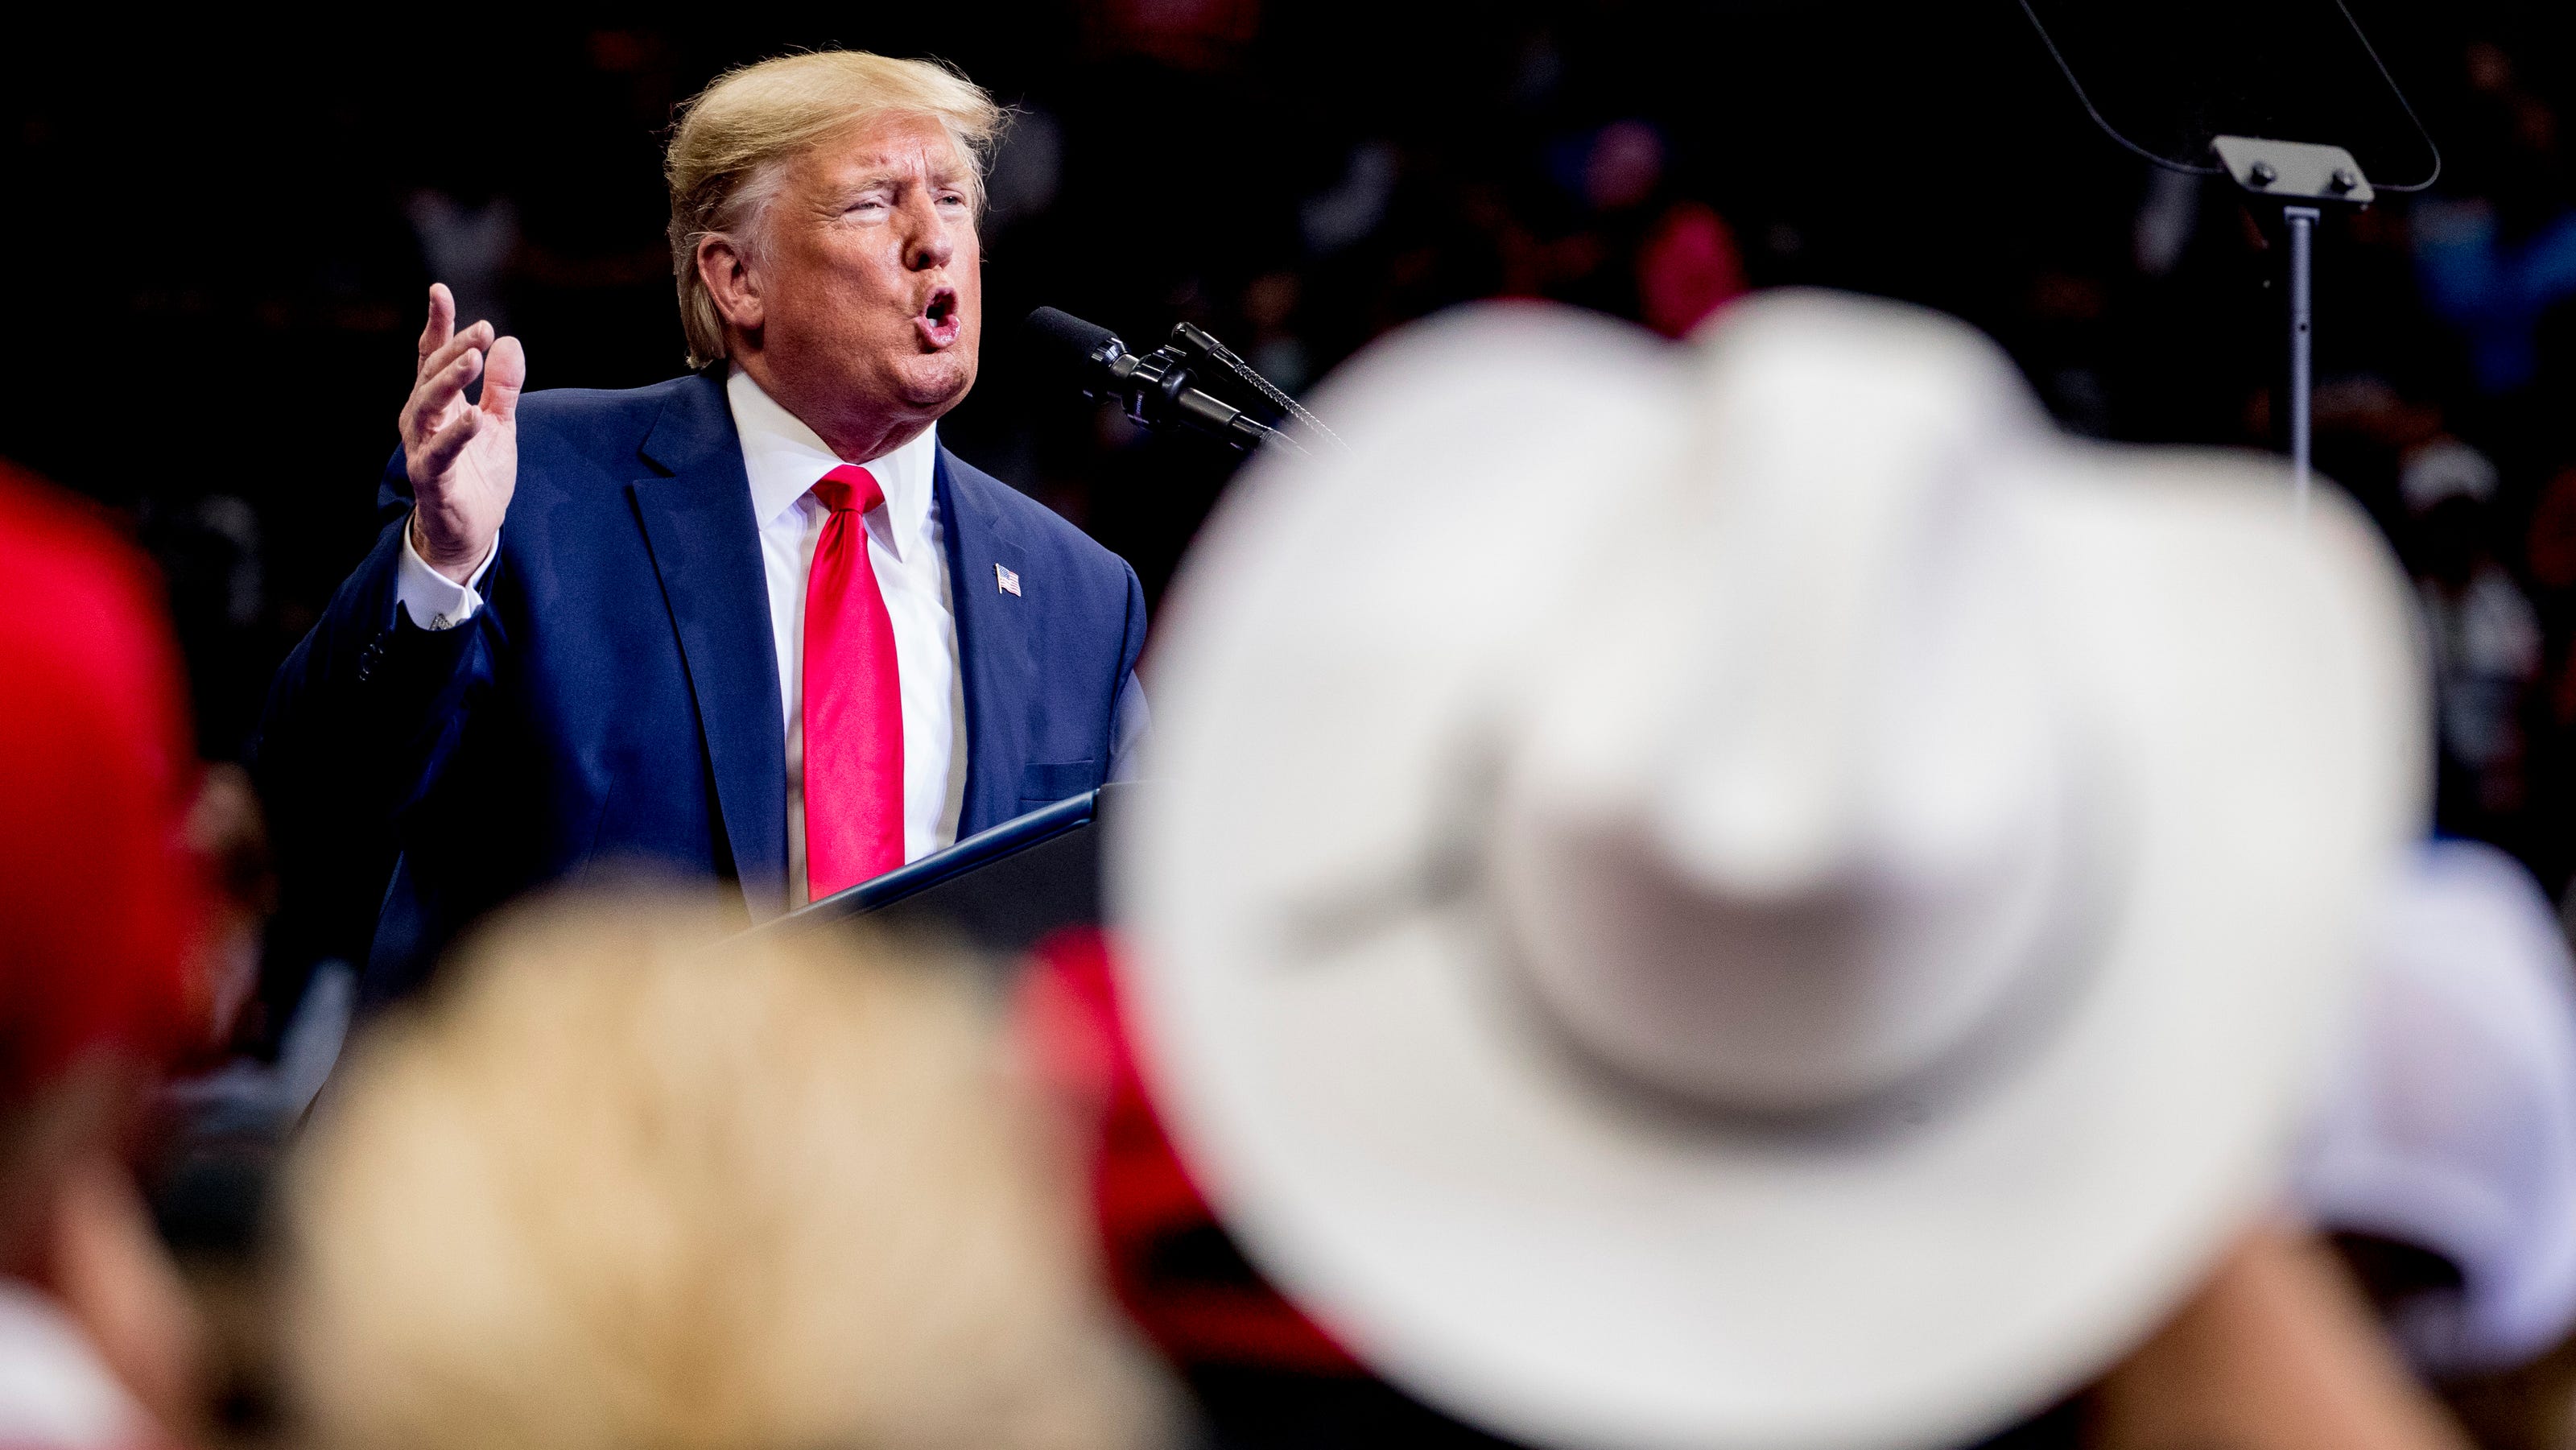 Donald Trump at Dallas rally: Fate of democracy is at stake in 2020